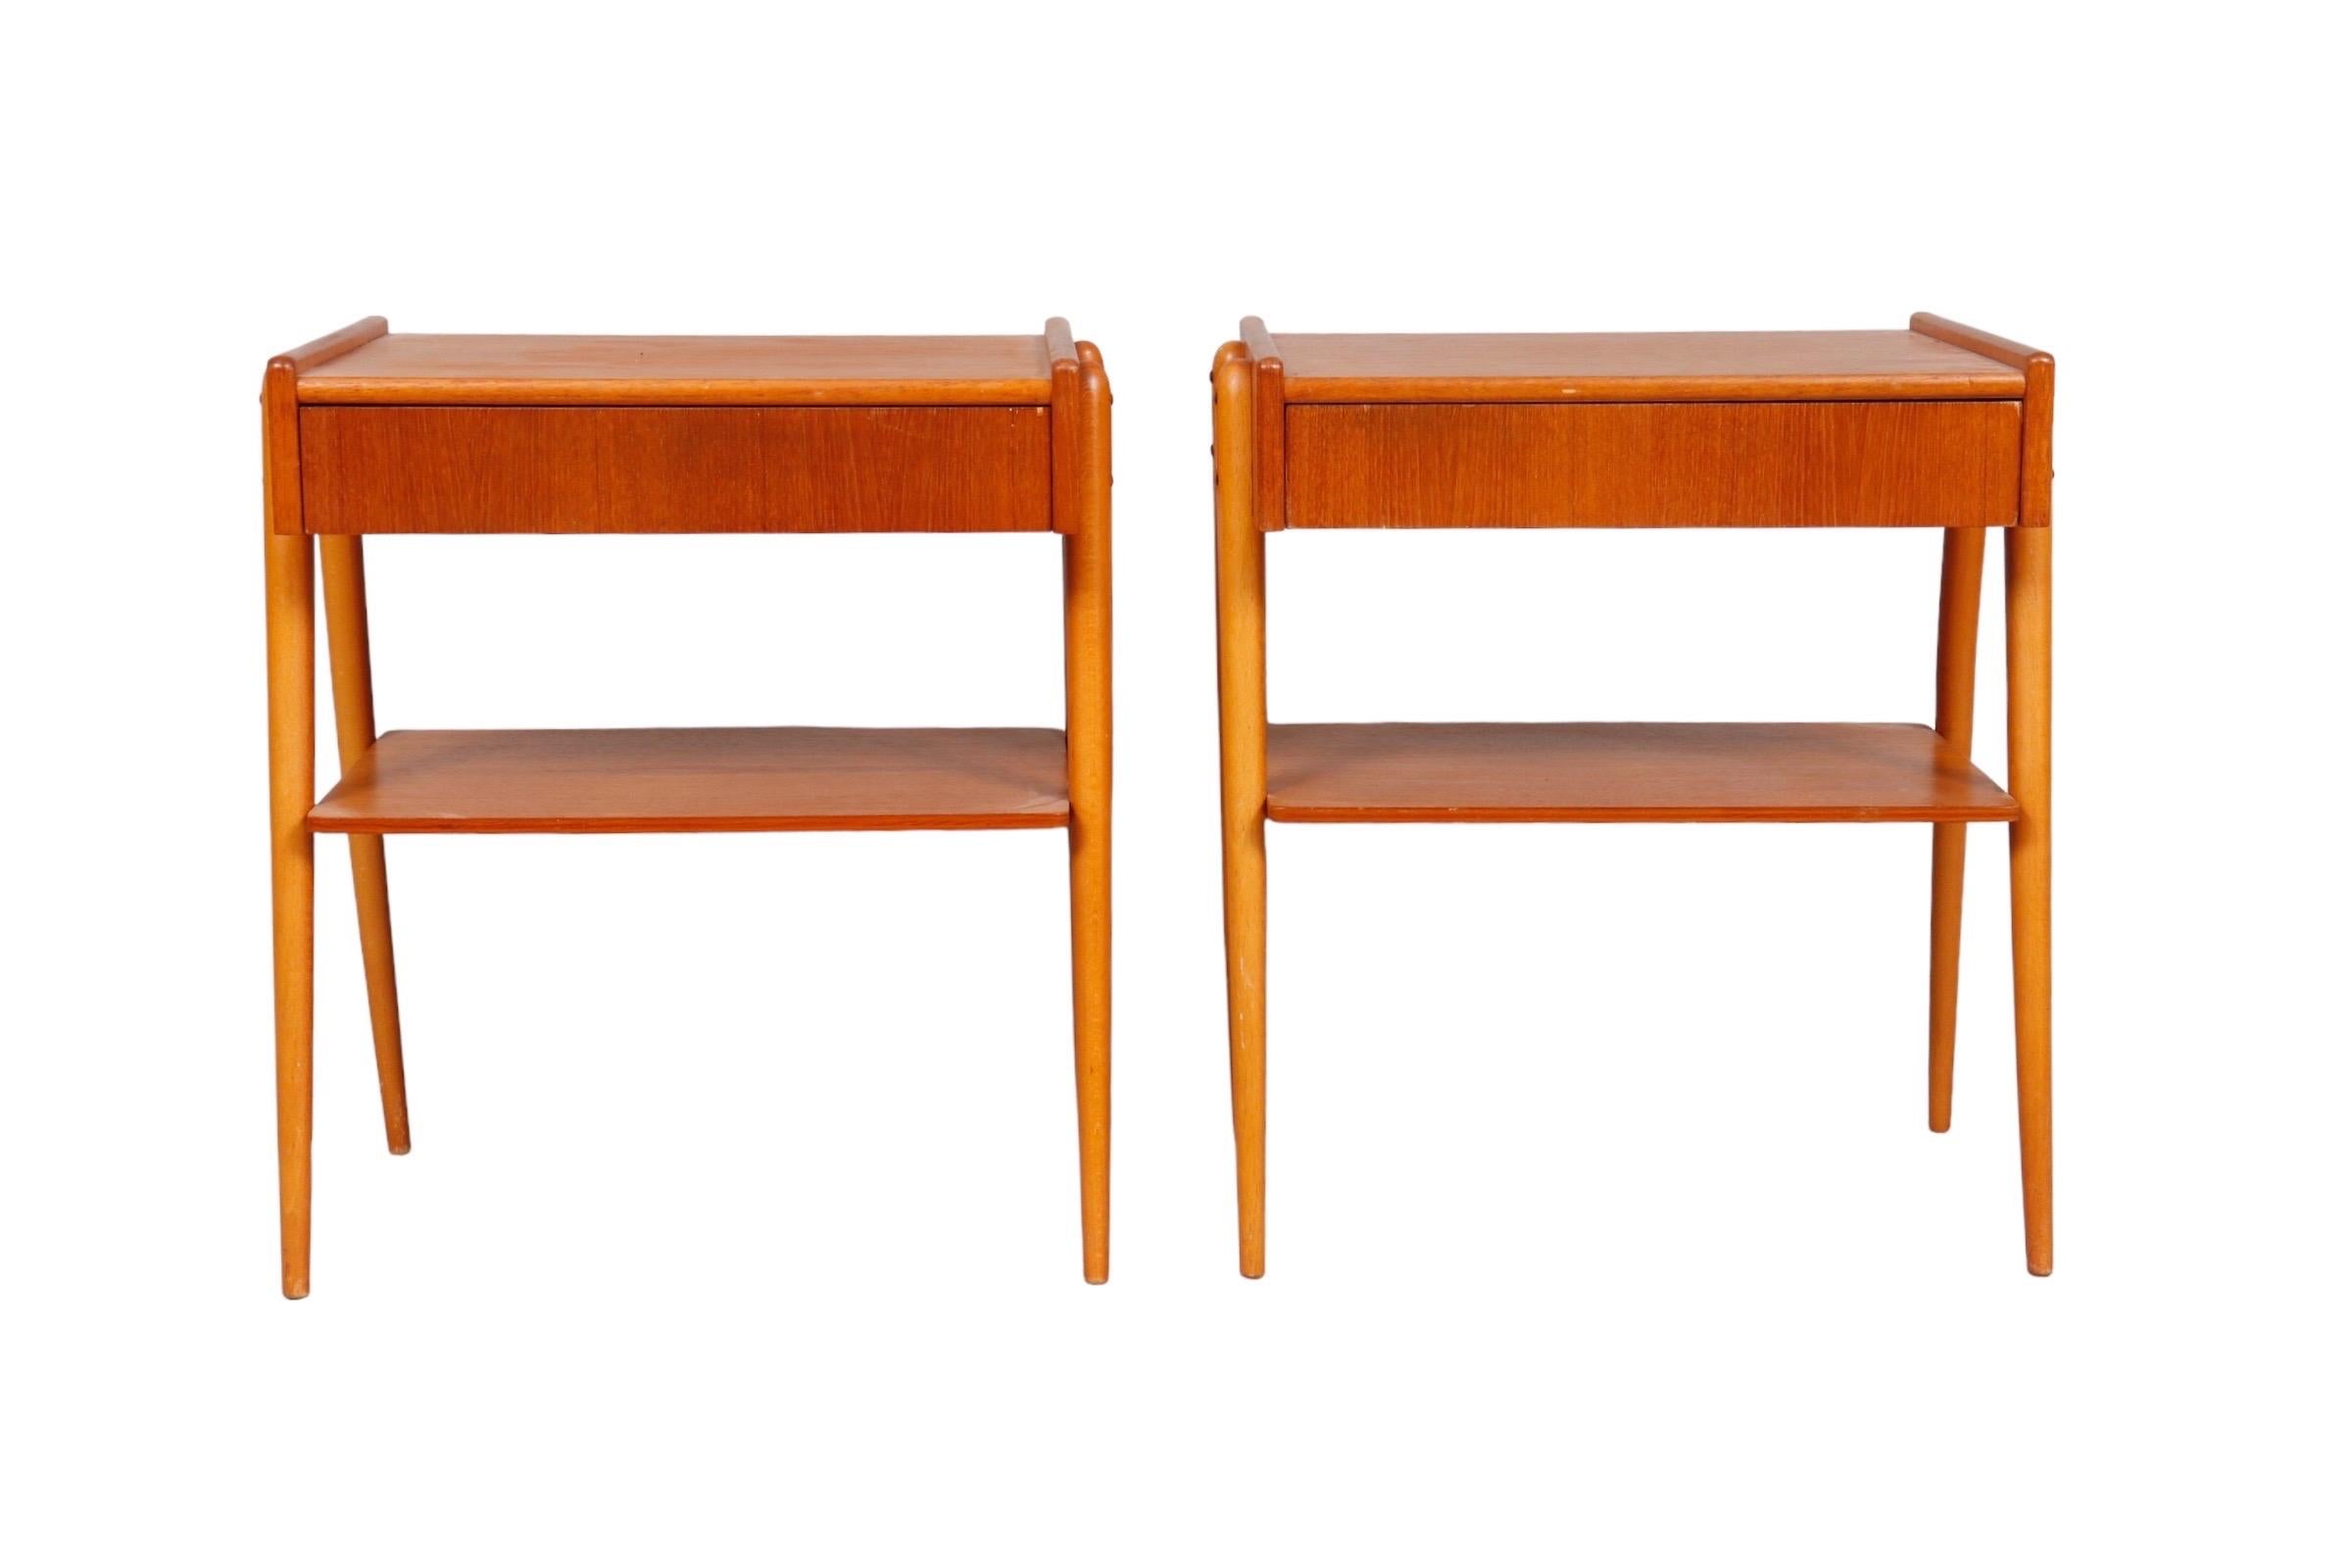 Pair of Mid-Century Modern nightstands by Carlström & Co Möbelfabrik. Made of beechwood with a single dovetailed drawer above a teak shelf.